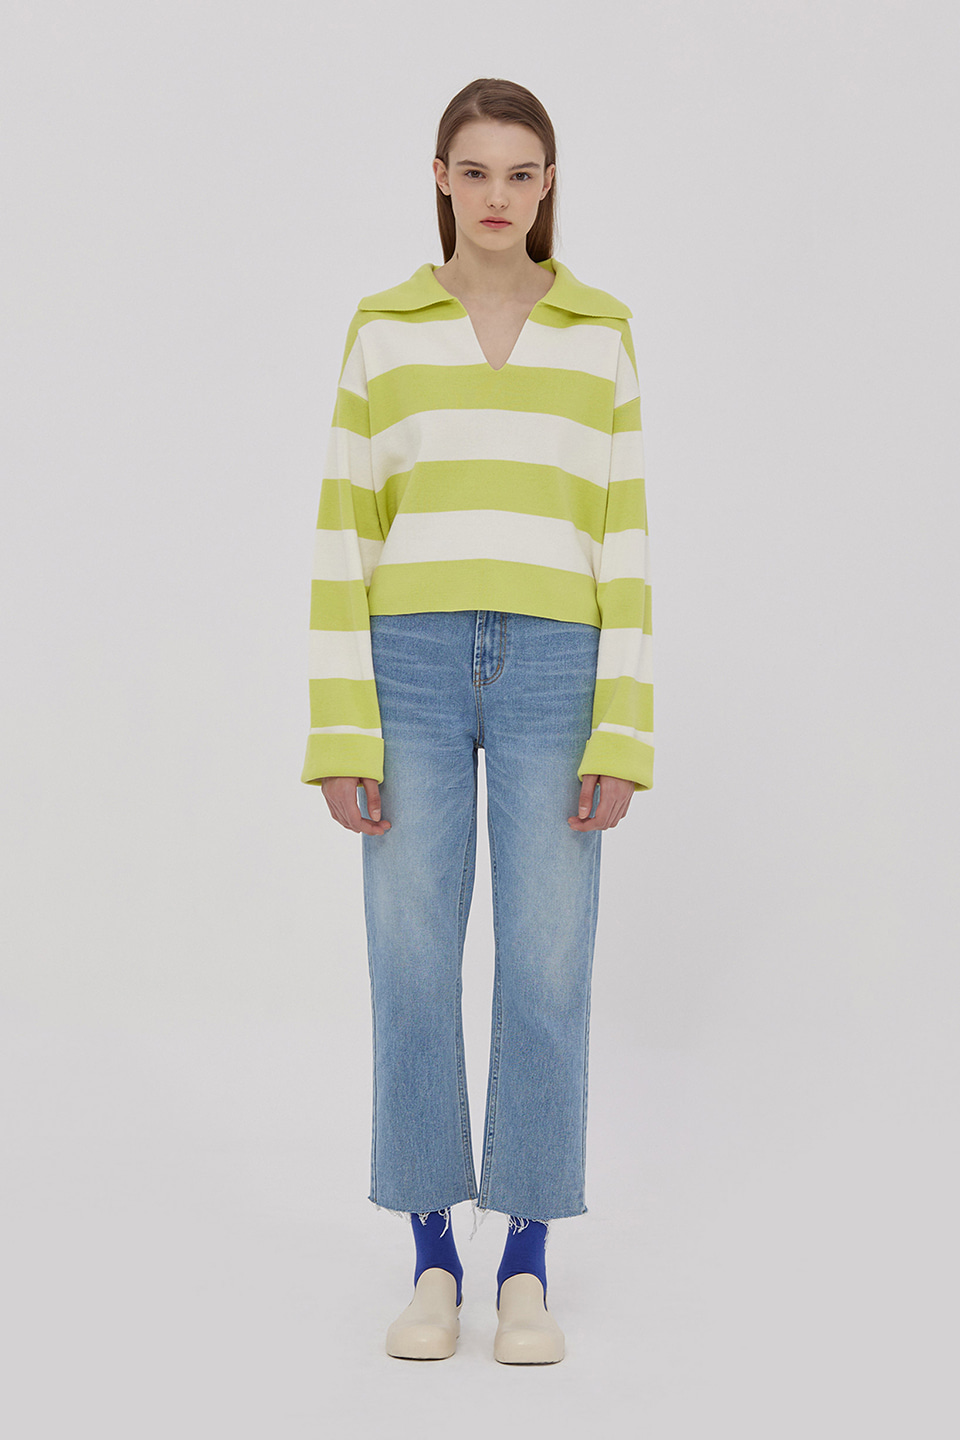 [Outlet] Collar Stripe Cropped Knit_YELLOW GREEN